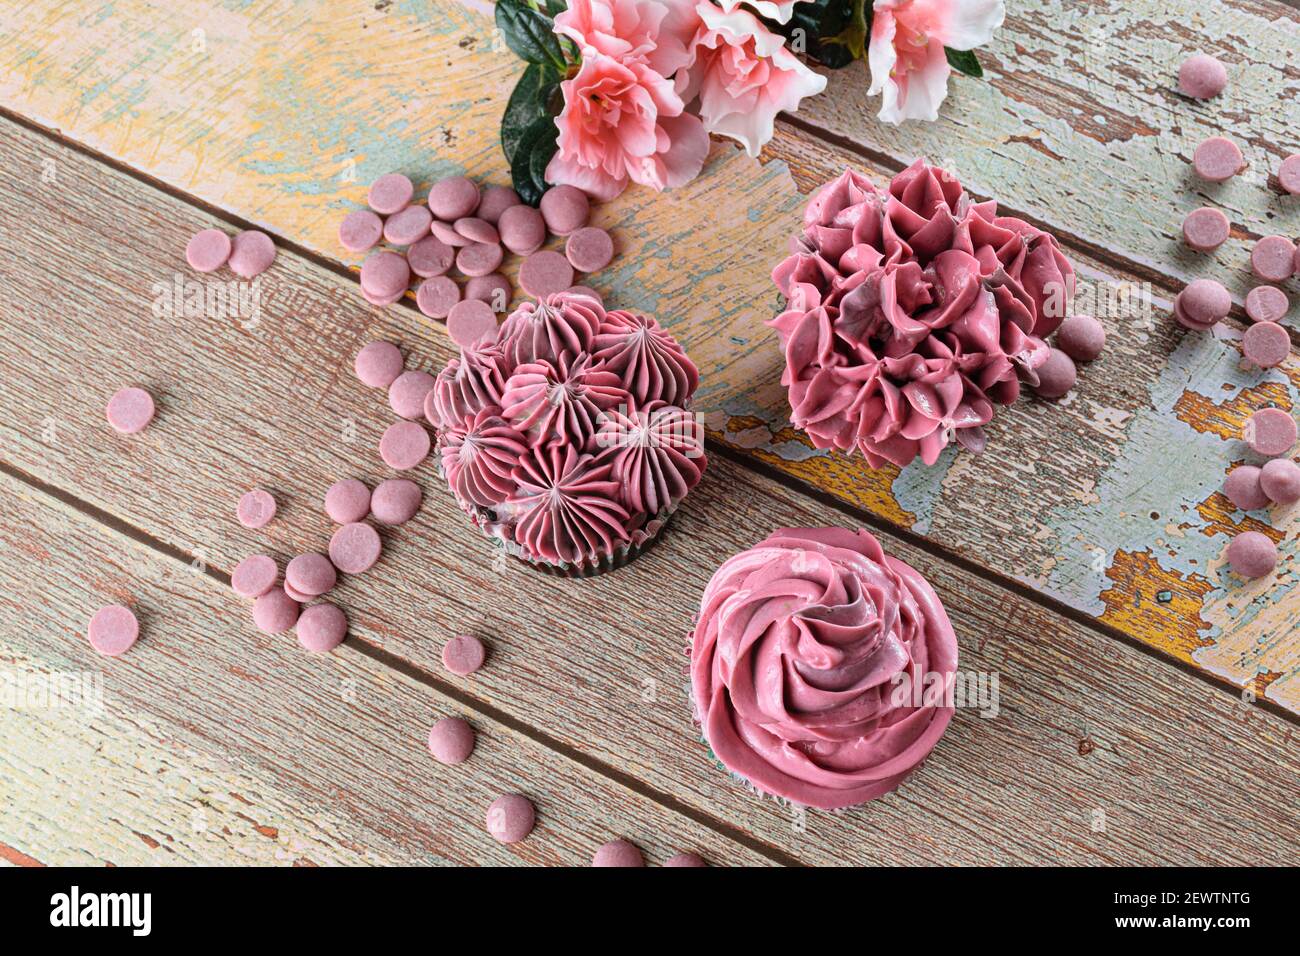 Three chocolate cupcakes with pink butter cream. Next to Ruby chocolate callets. Stock Photo